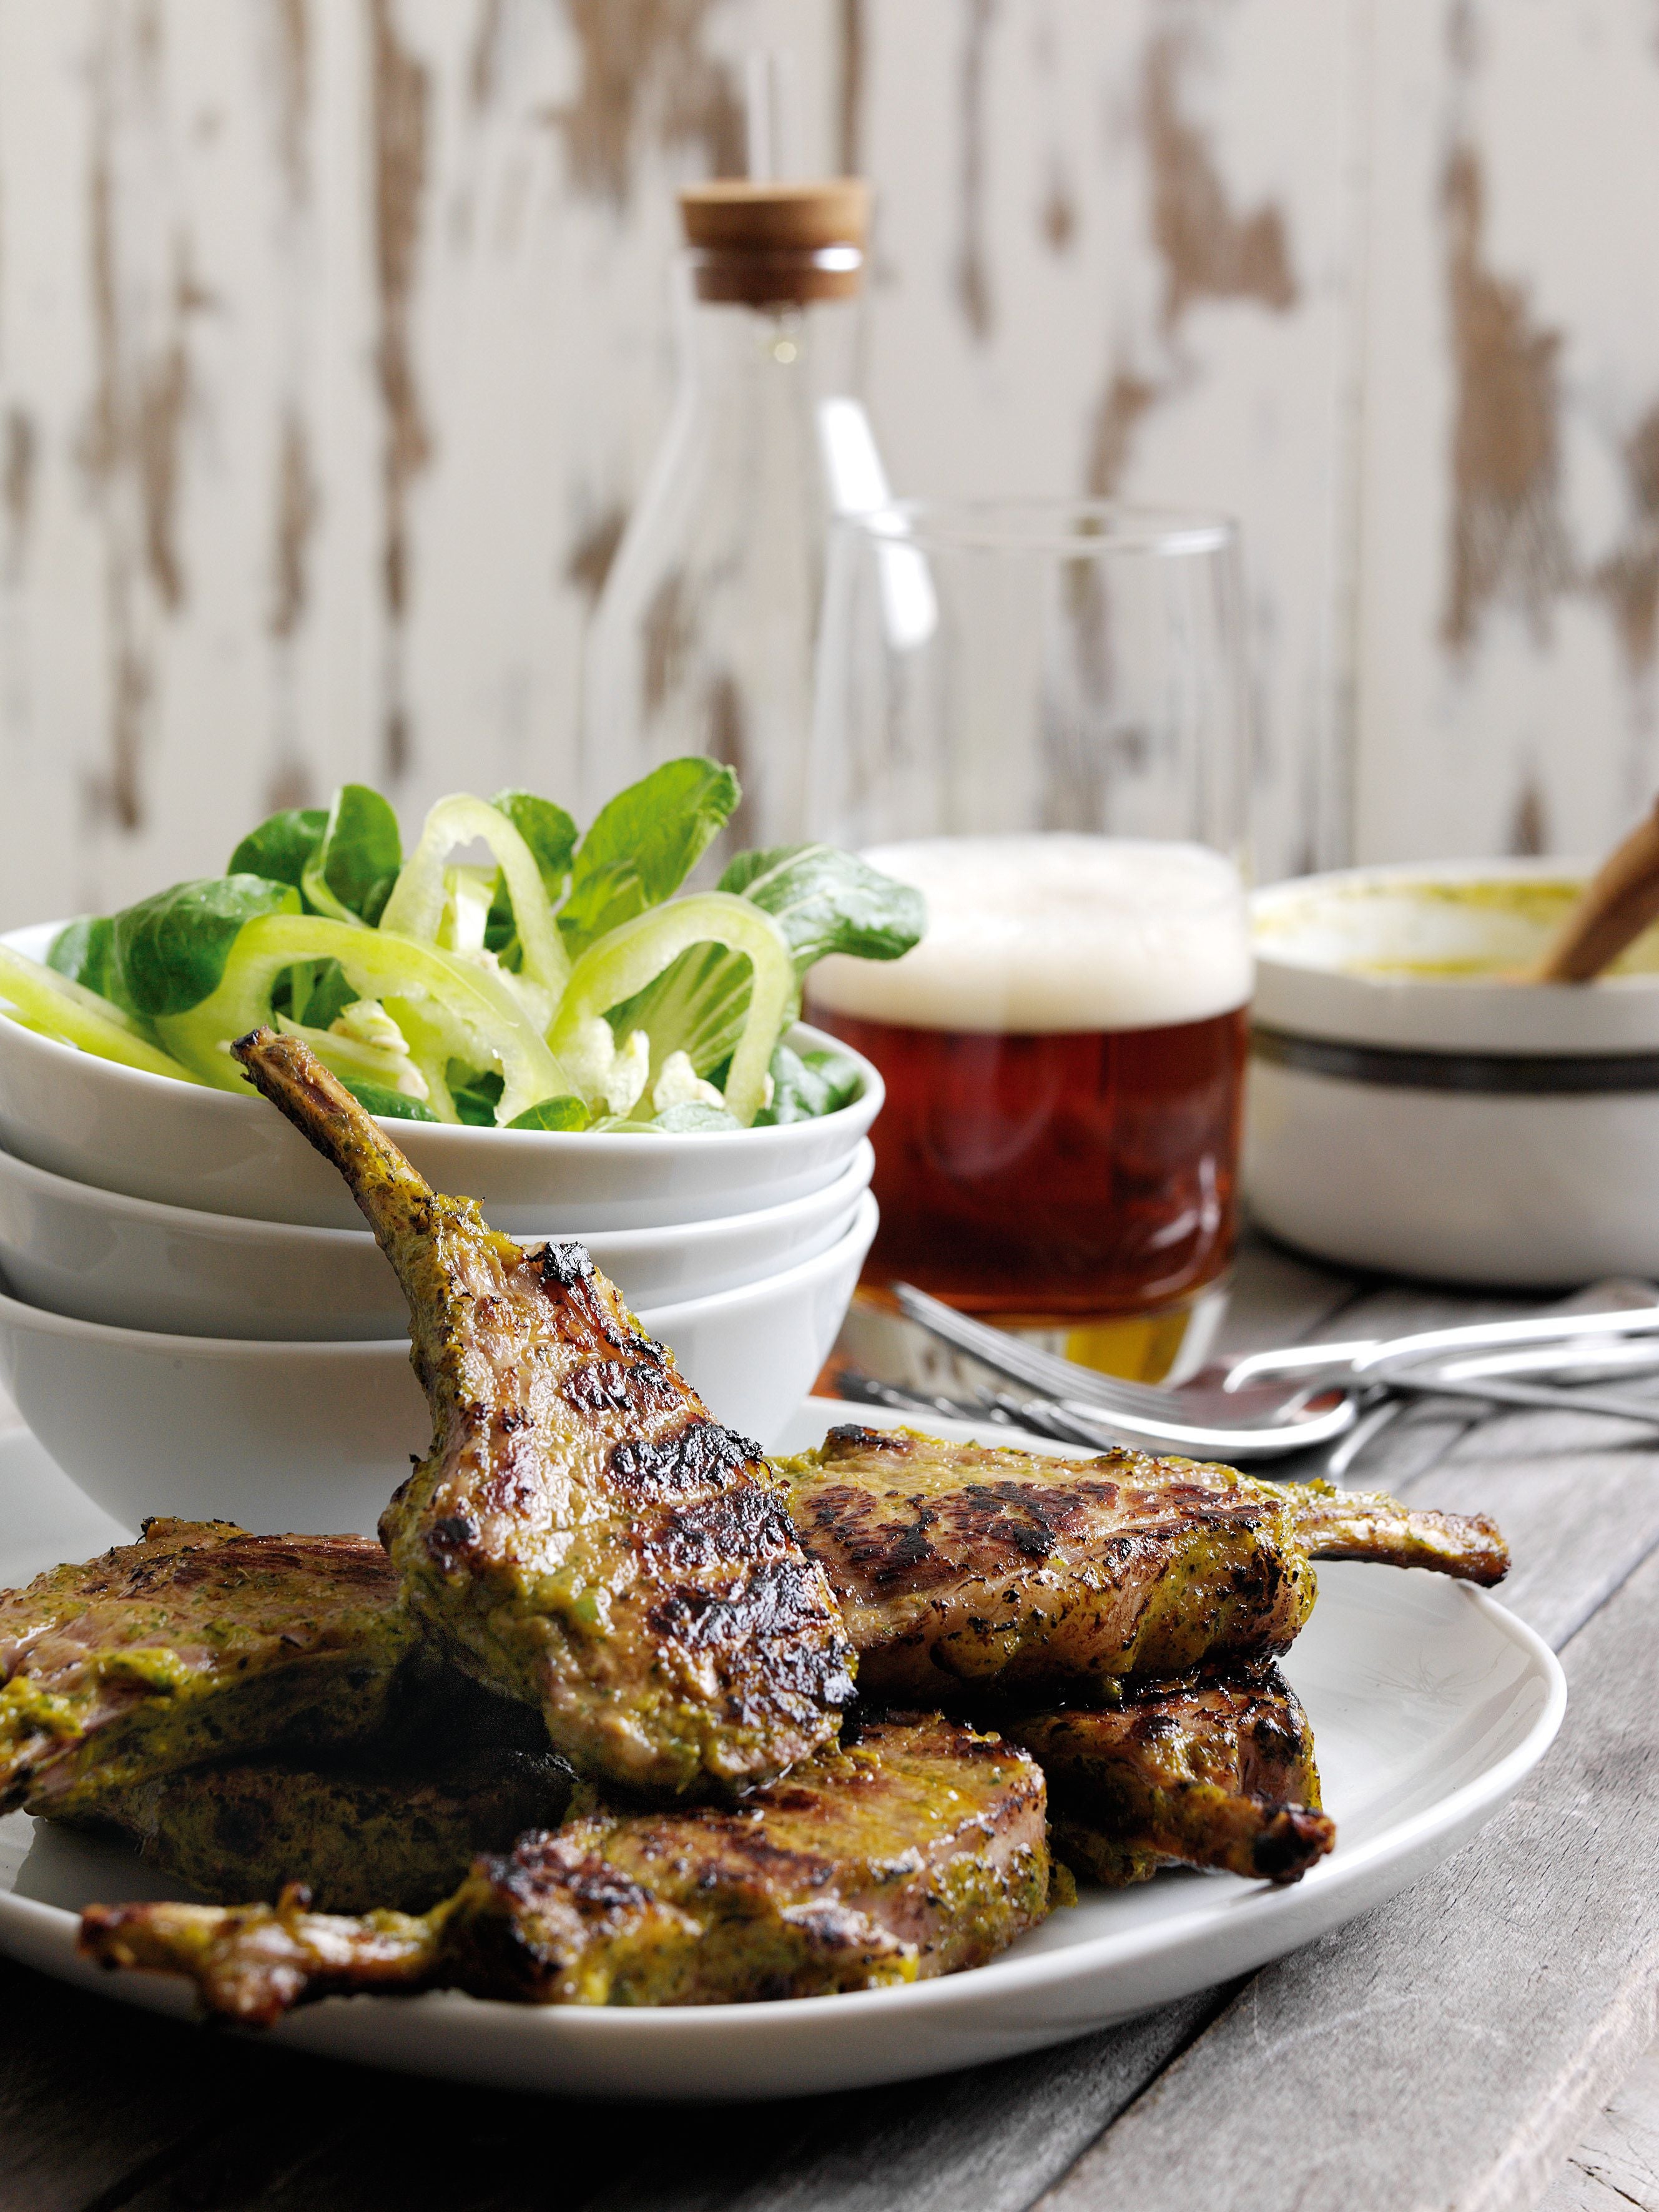 Swap steaks for lamb on the grill this summer.